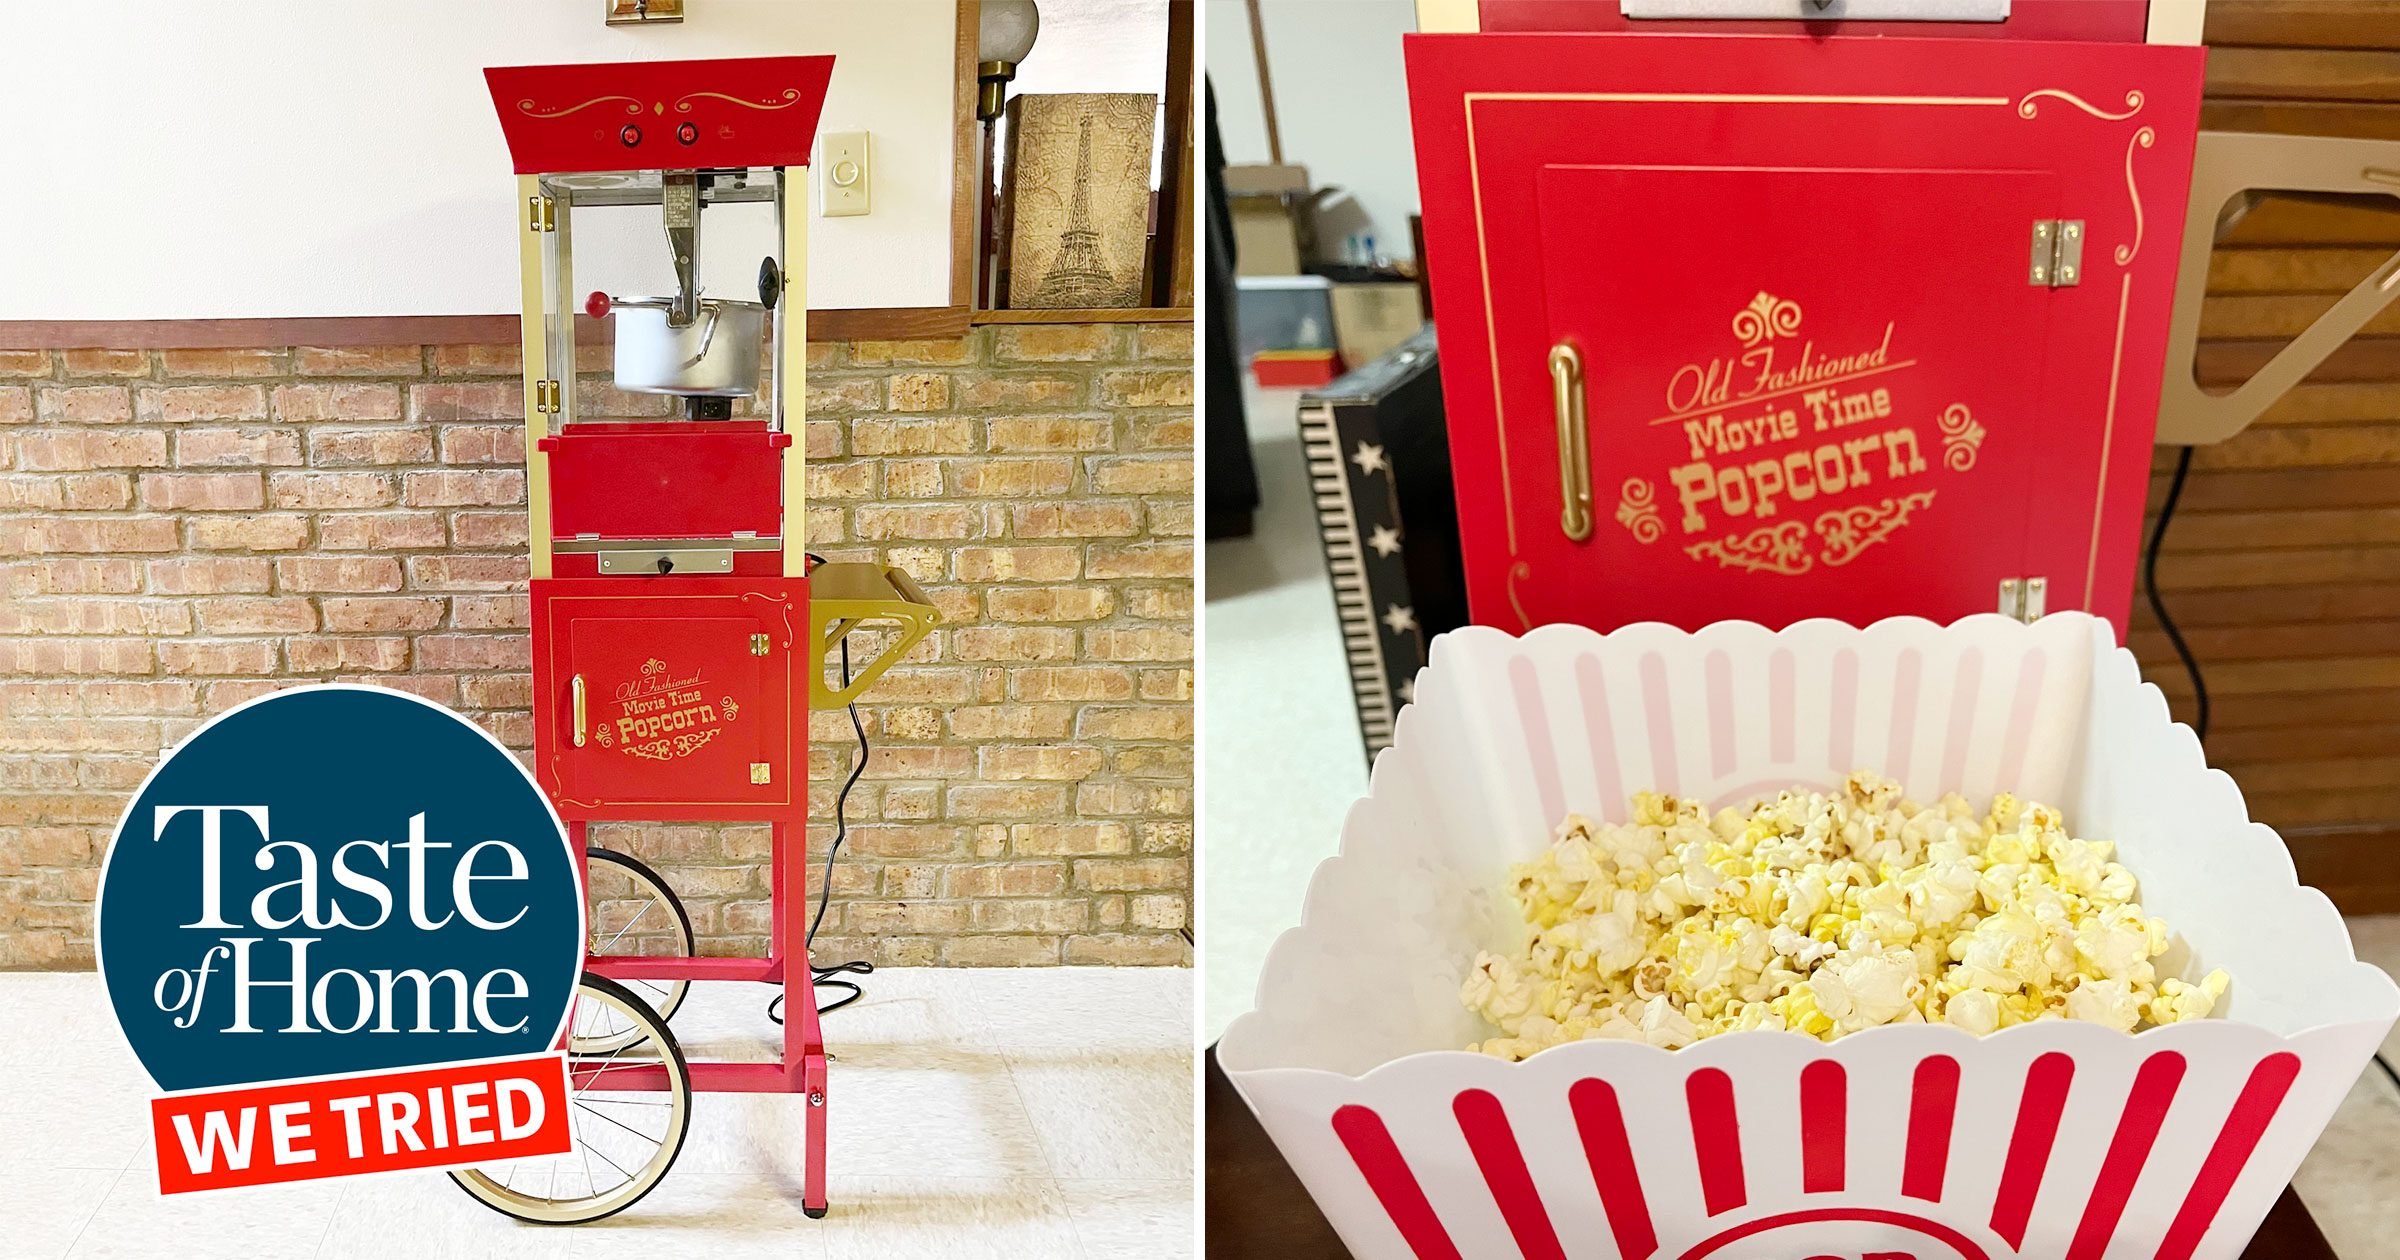 All Purpose Mall - Available is our Electric Corn Popcorn Maker